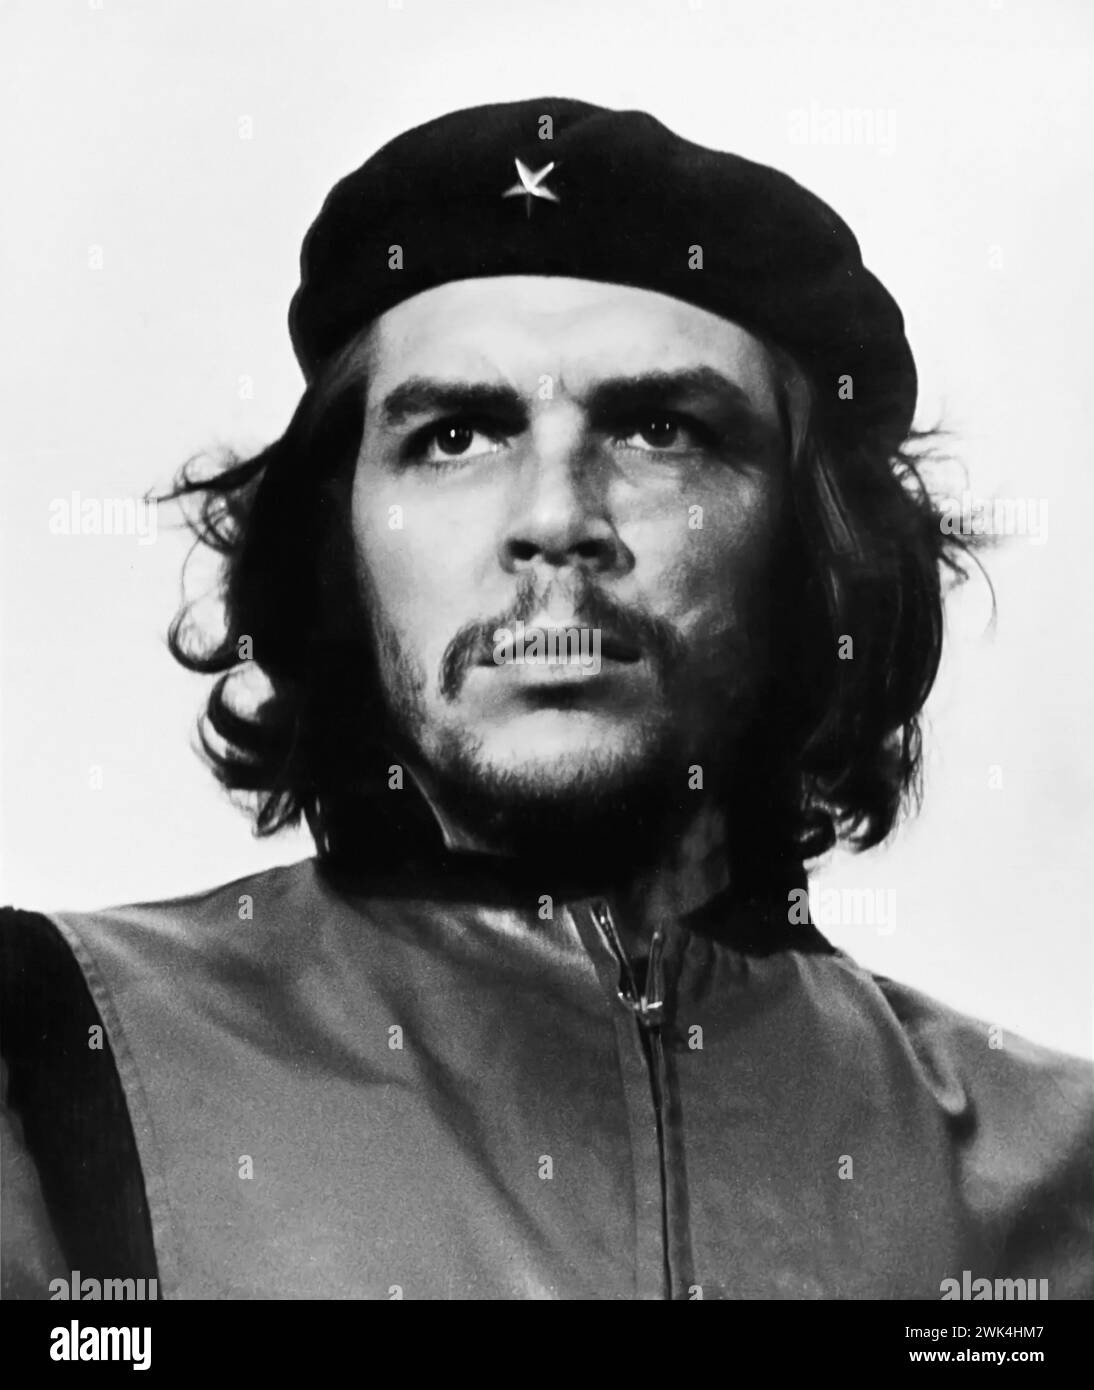 Che Guevara. Portrait of the Argentinian born Marxist revolutionary and a key figure in the Cuban Revolution., Ernesto 'Che' Guevara (1928-1967).  Photo by Alberto Korda, 1960 Stock Photo